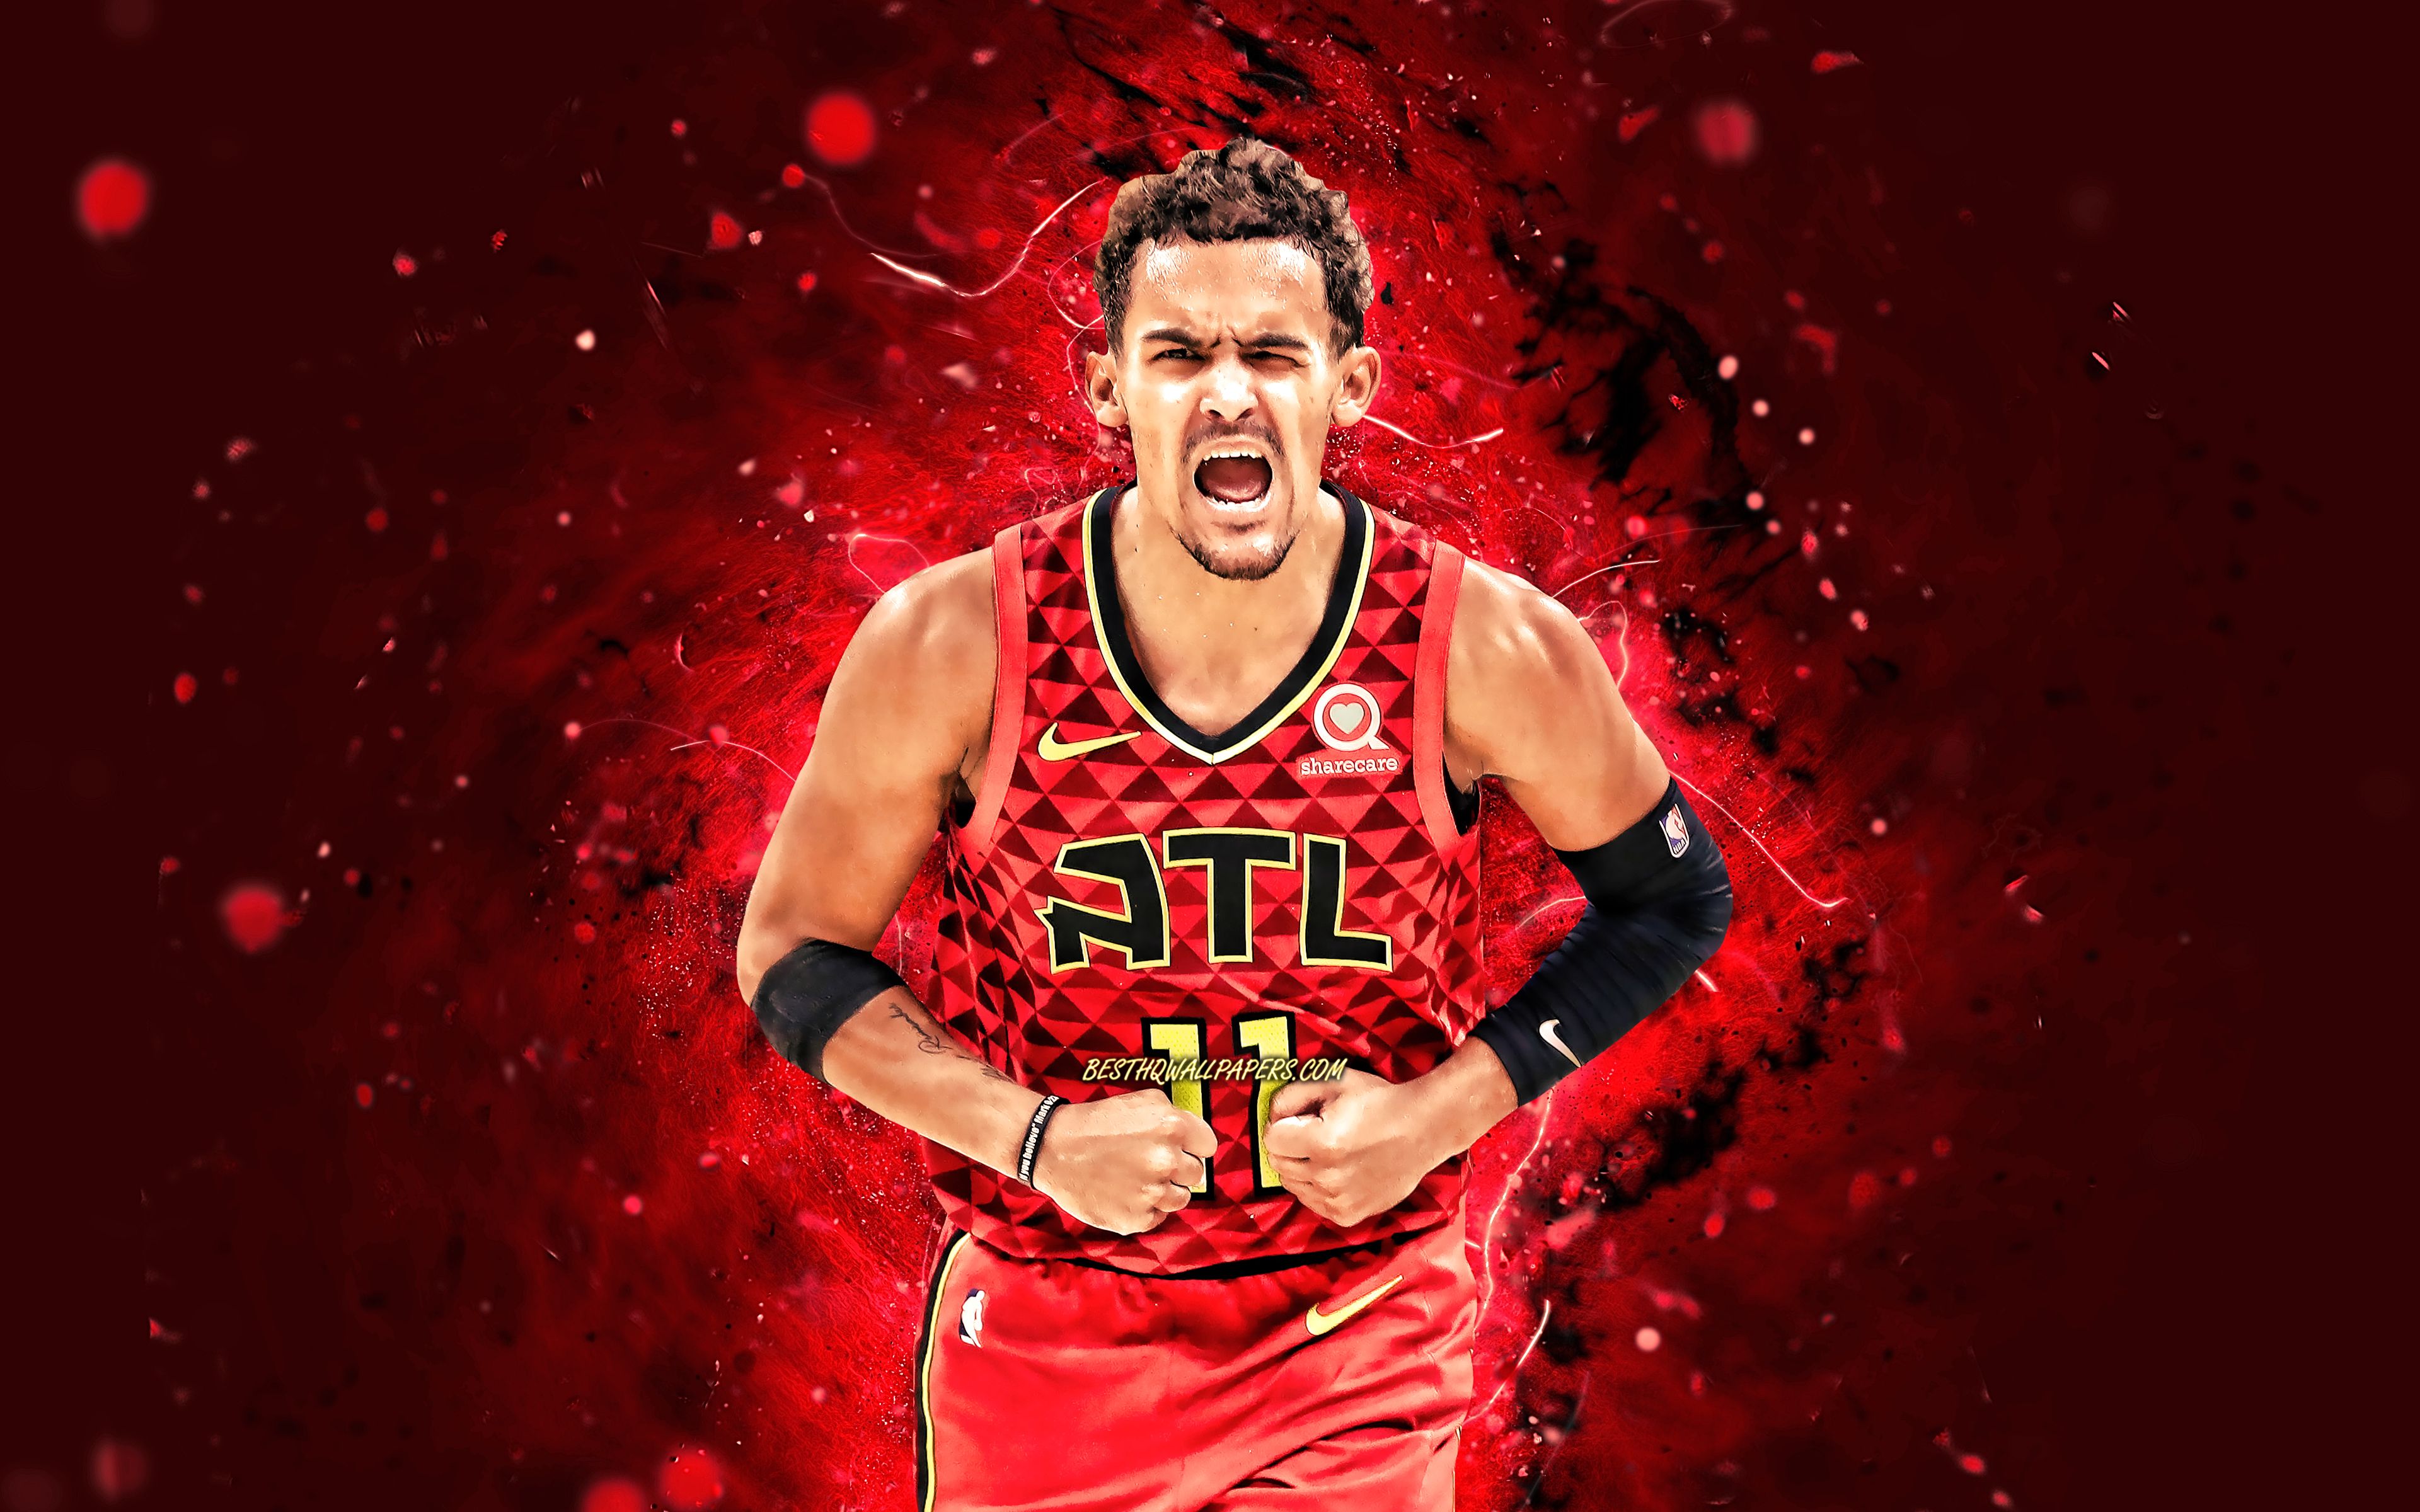 Download wallpaper Trae Young, 4k, Atlanta Hawks, NBA, basketball, red neon lights, Rayford Trae Young, USA, Trae Young Atlanta Hawks, Trae Young 4K for desktop with resolution 3840x2400. High Quality HD